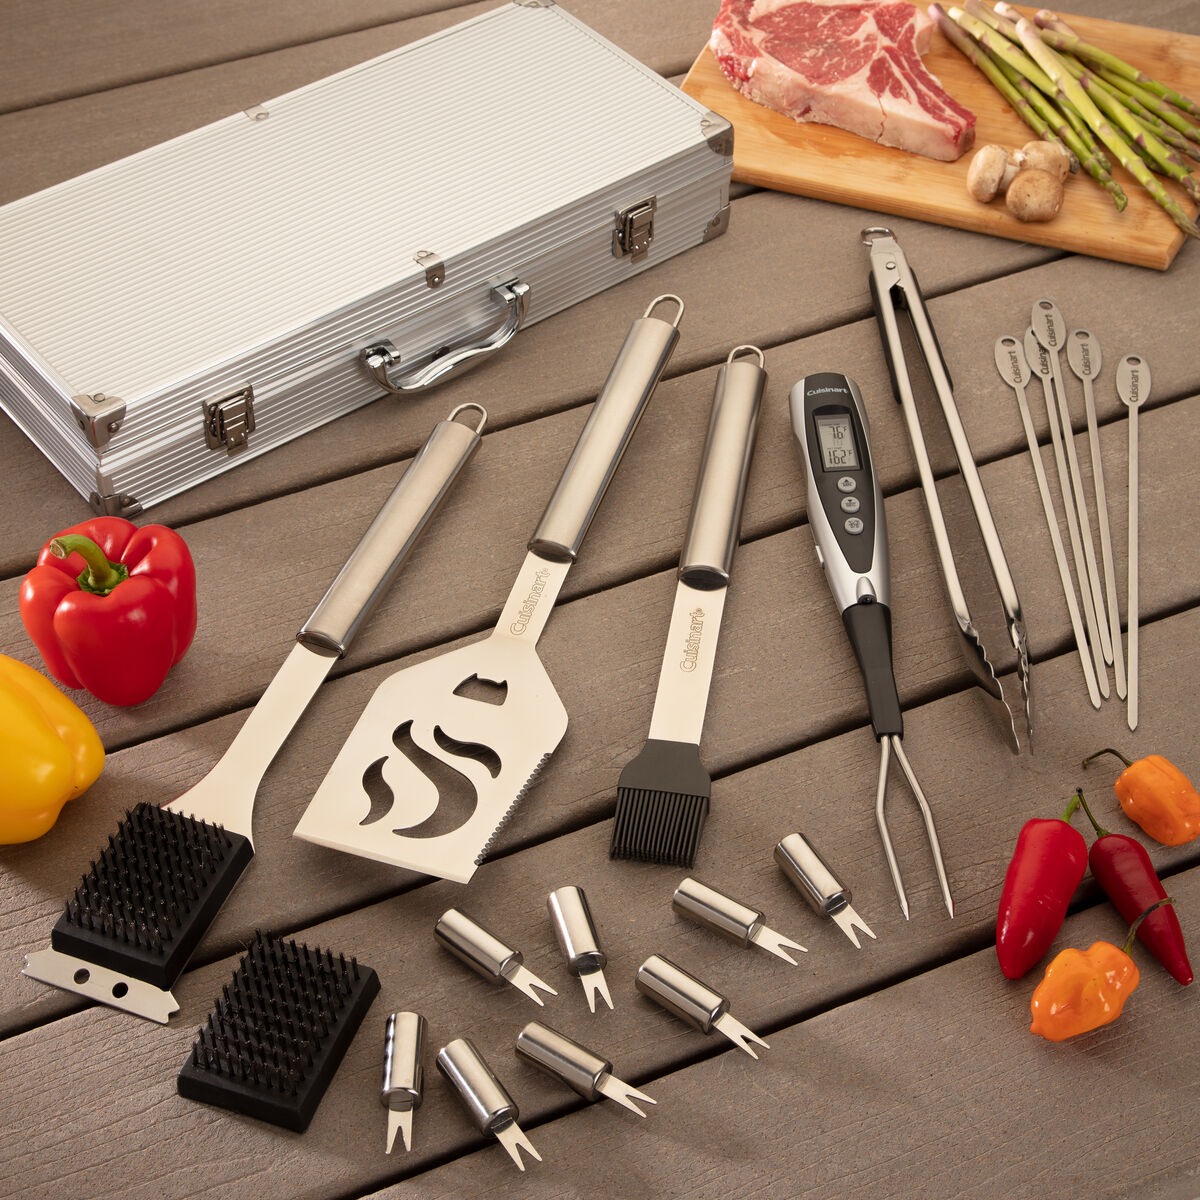 Deluxe Grill Set (20 Piece)